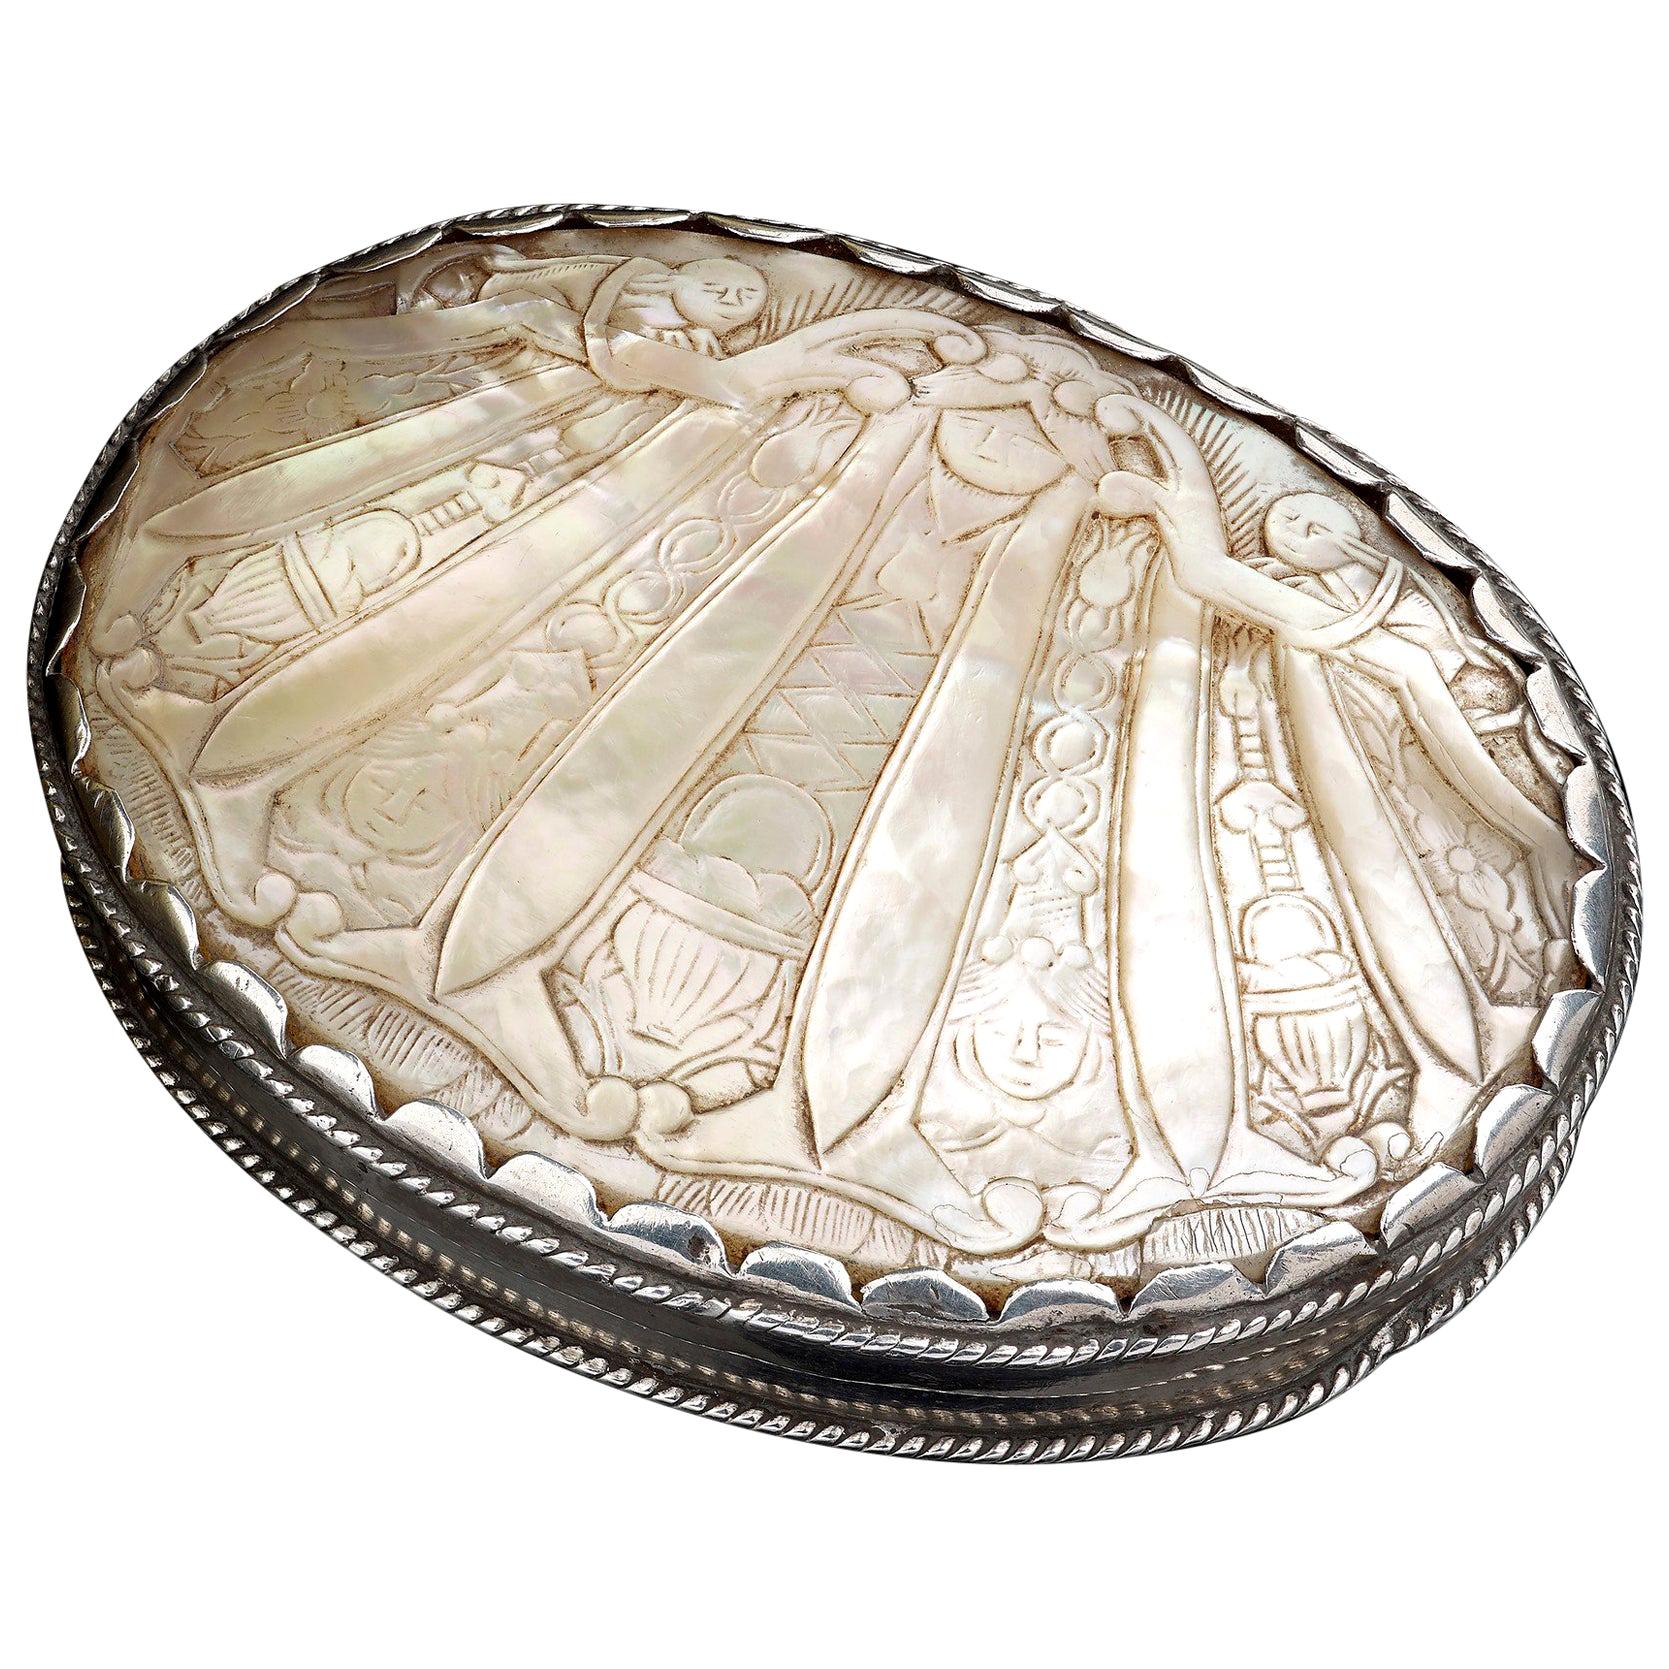 Spanish Carved Mother of Pearl Box with Silver Mounts, 17th Century For Sale